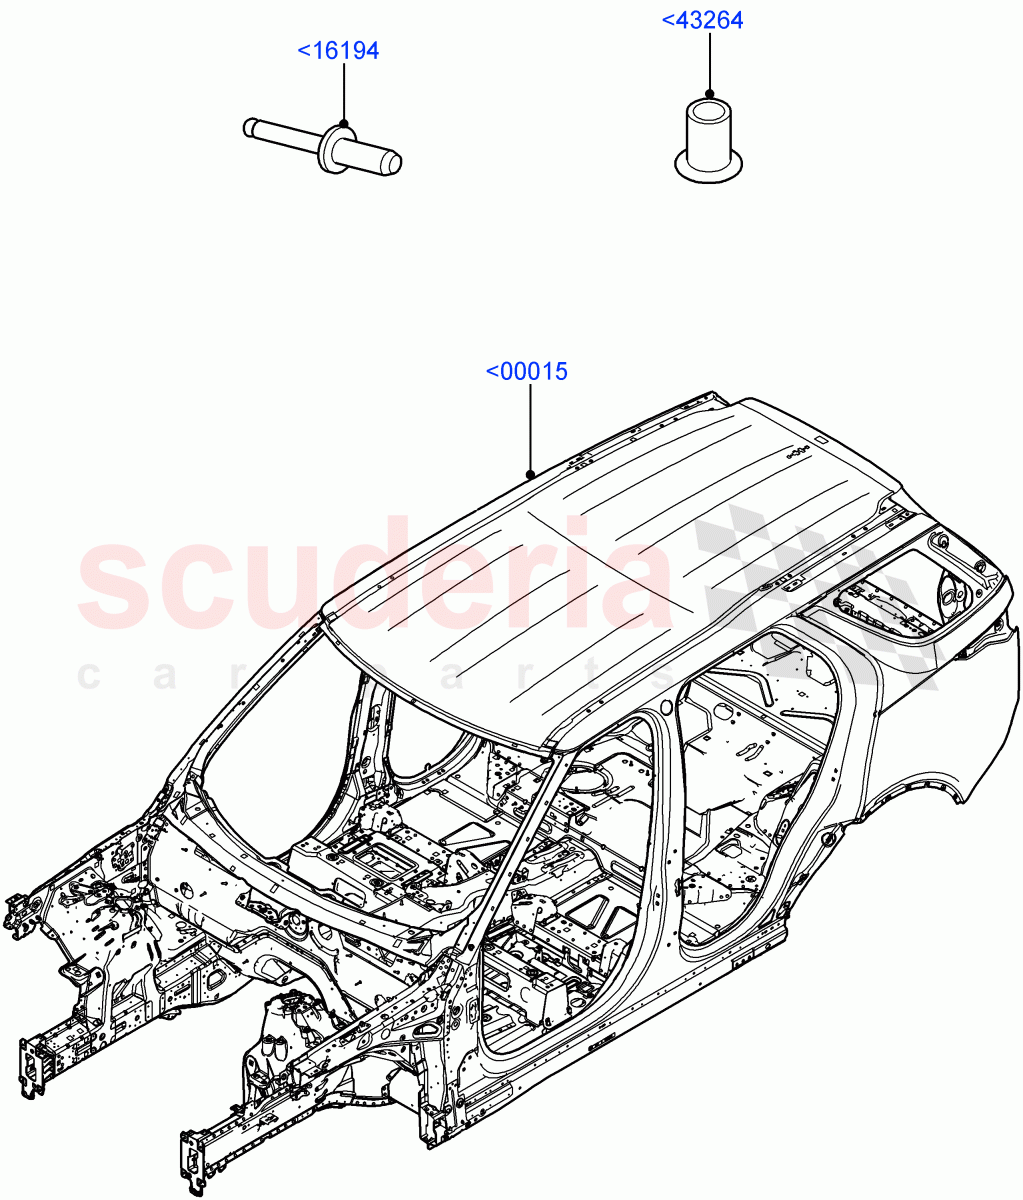 Bodyshell(Nitra Plant Build)((V)FROMK2000001) of Land Rover Land Rover Discovery 5 (2017+) [2.0 Turbo Diesel]